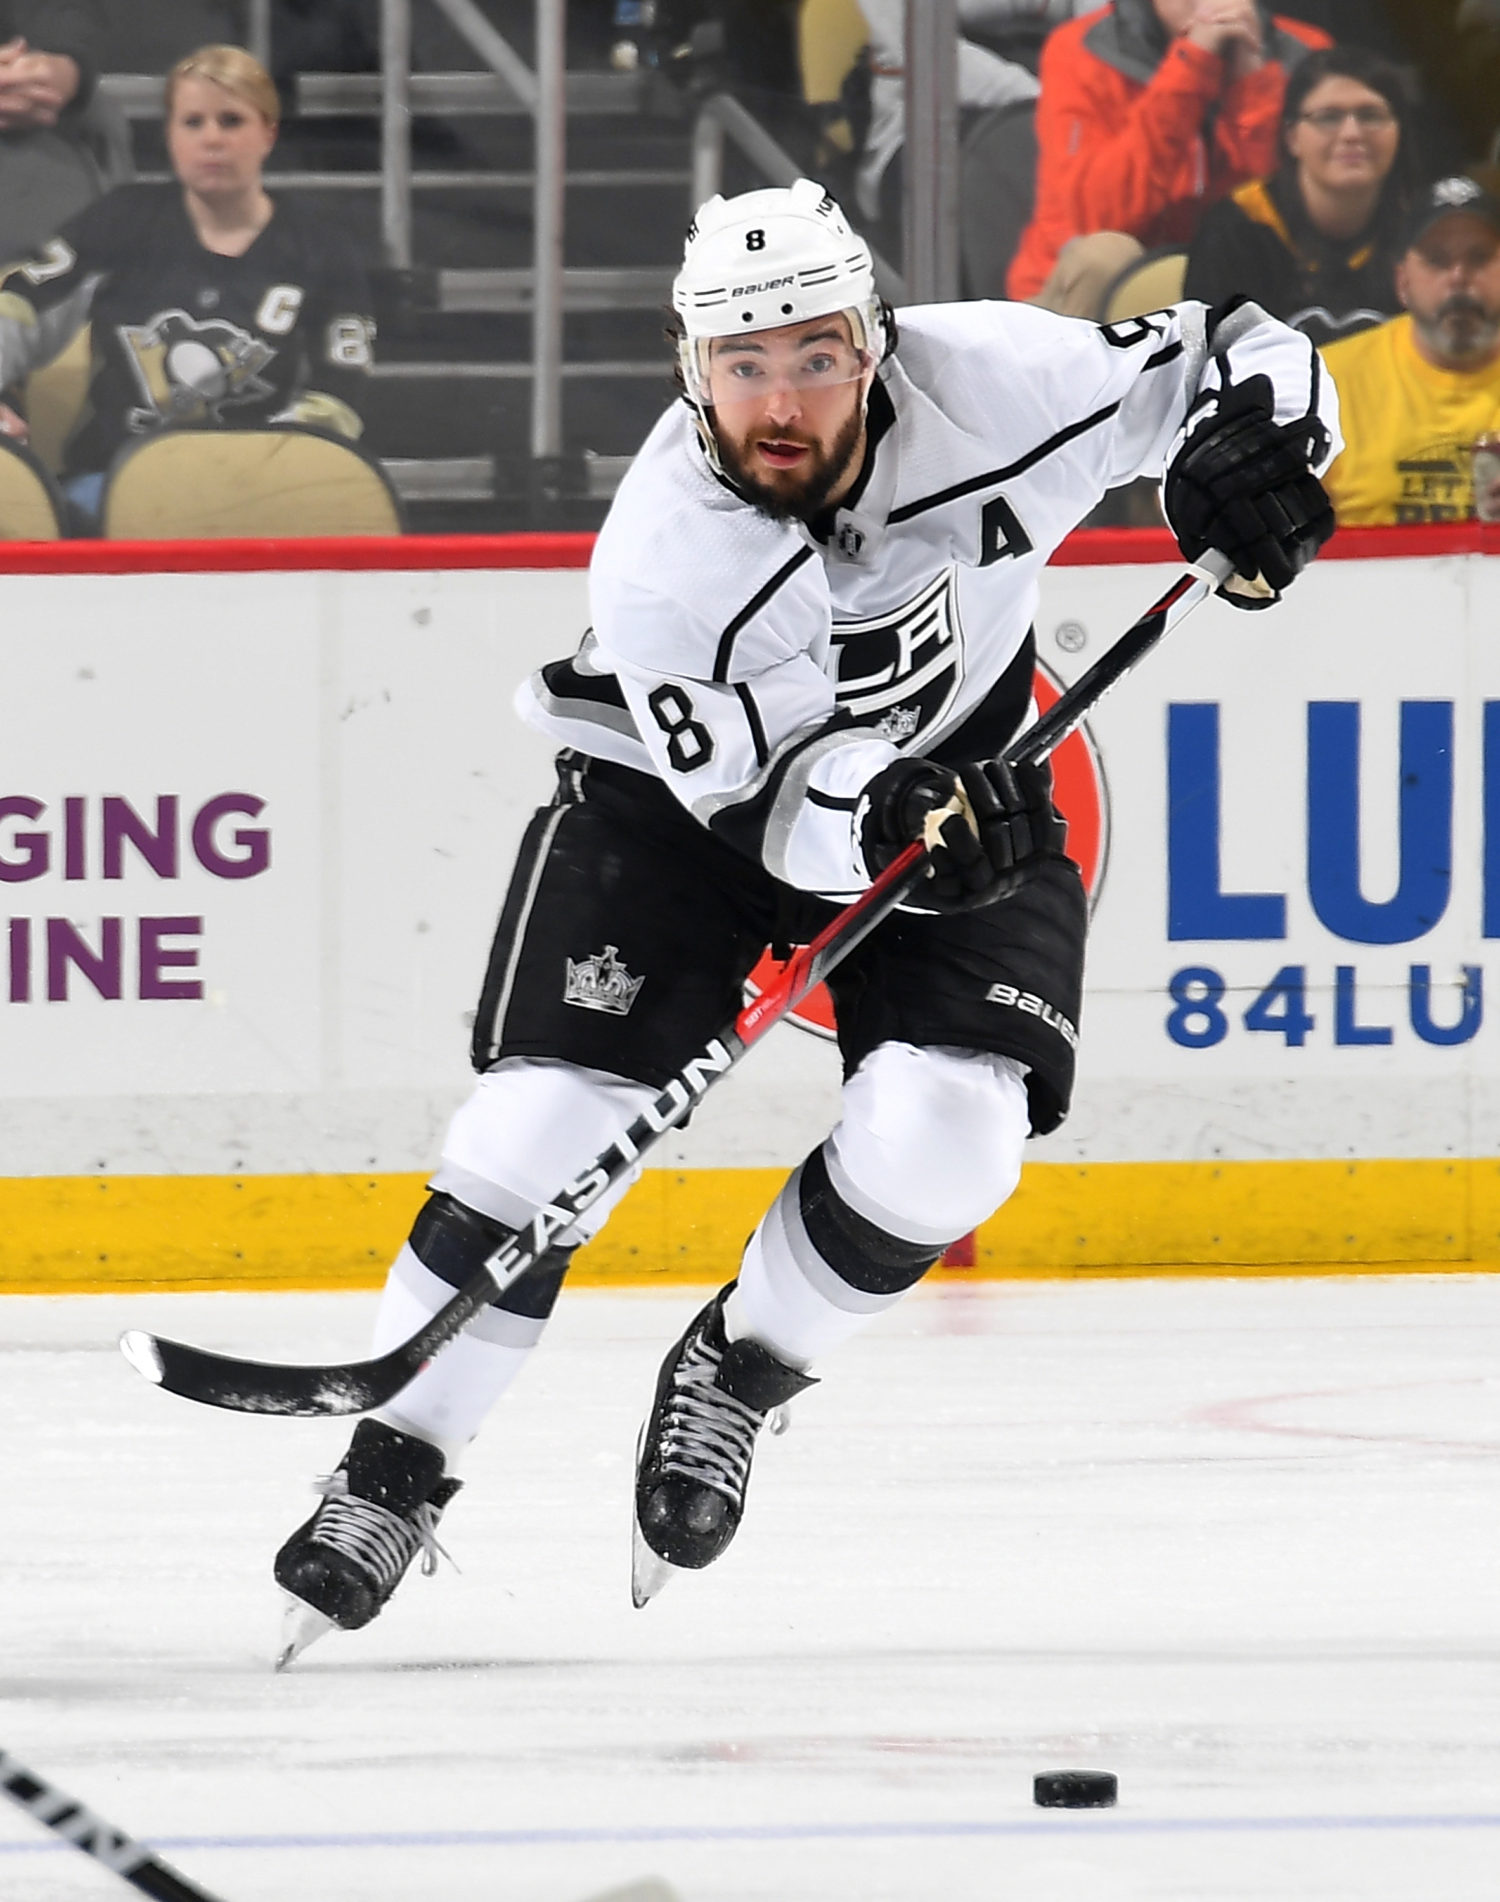 Double Team: Kings, Penguins both lucky to have had Luc Robitalle